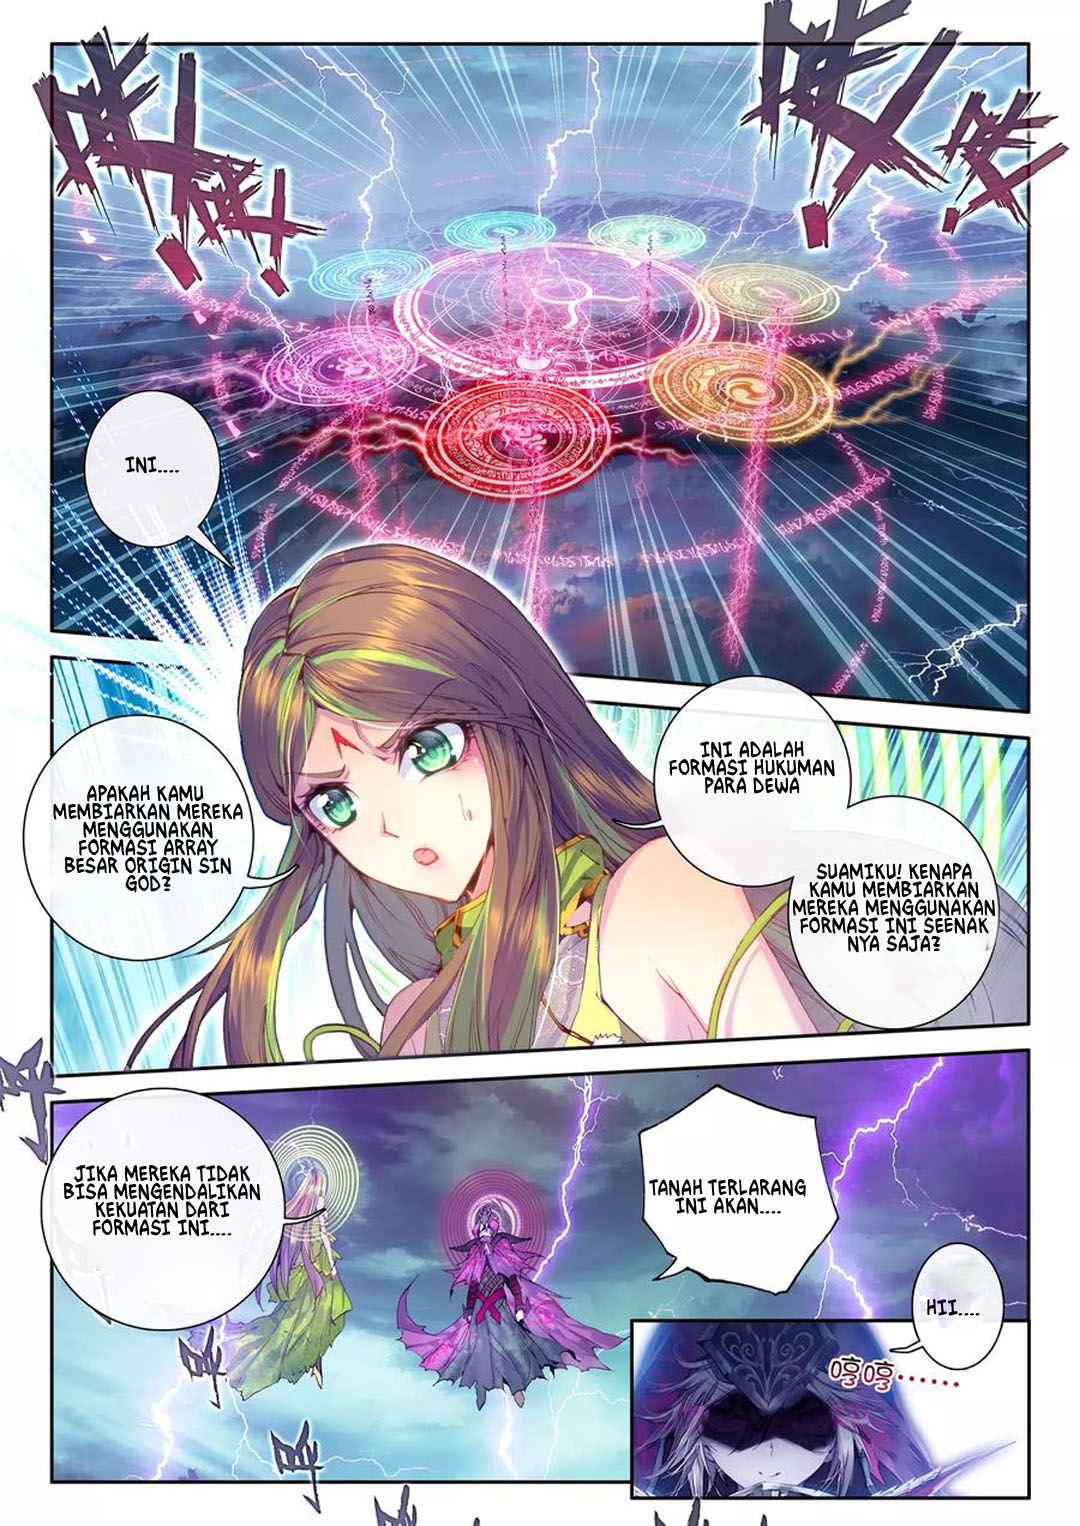 Soul Land – Legend of The Gods’ Realm Chapter 40.2 7